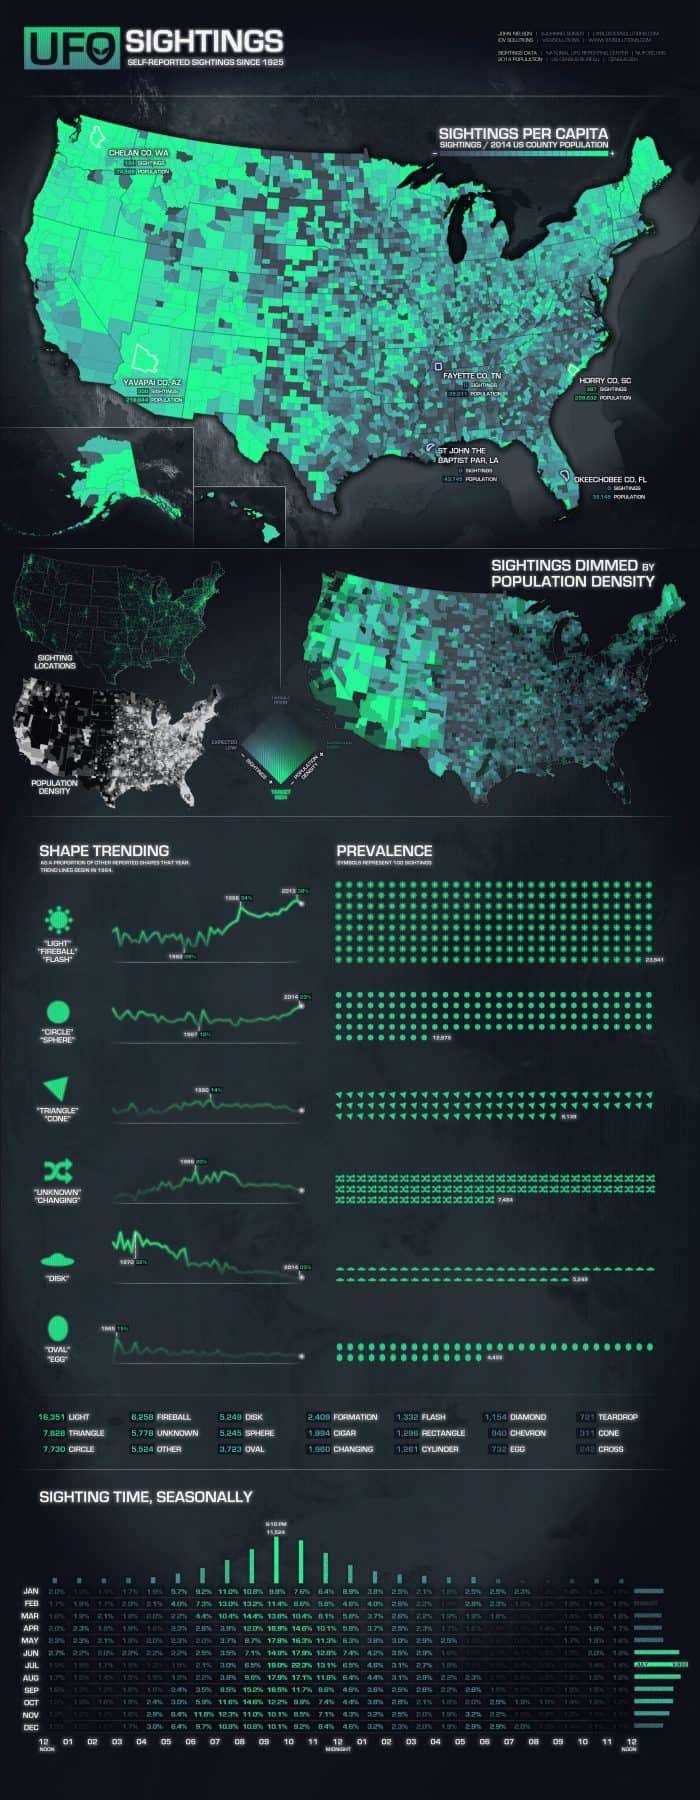 Every Reported UFO Sighting Since 1925